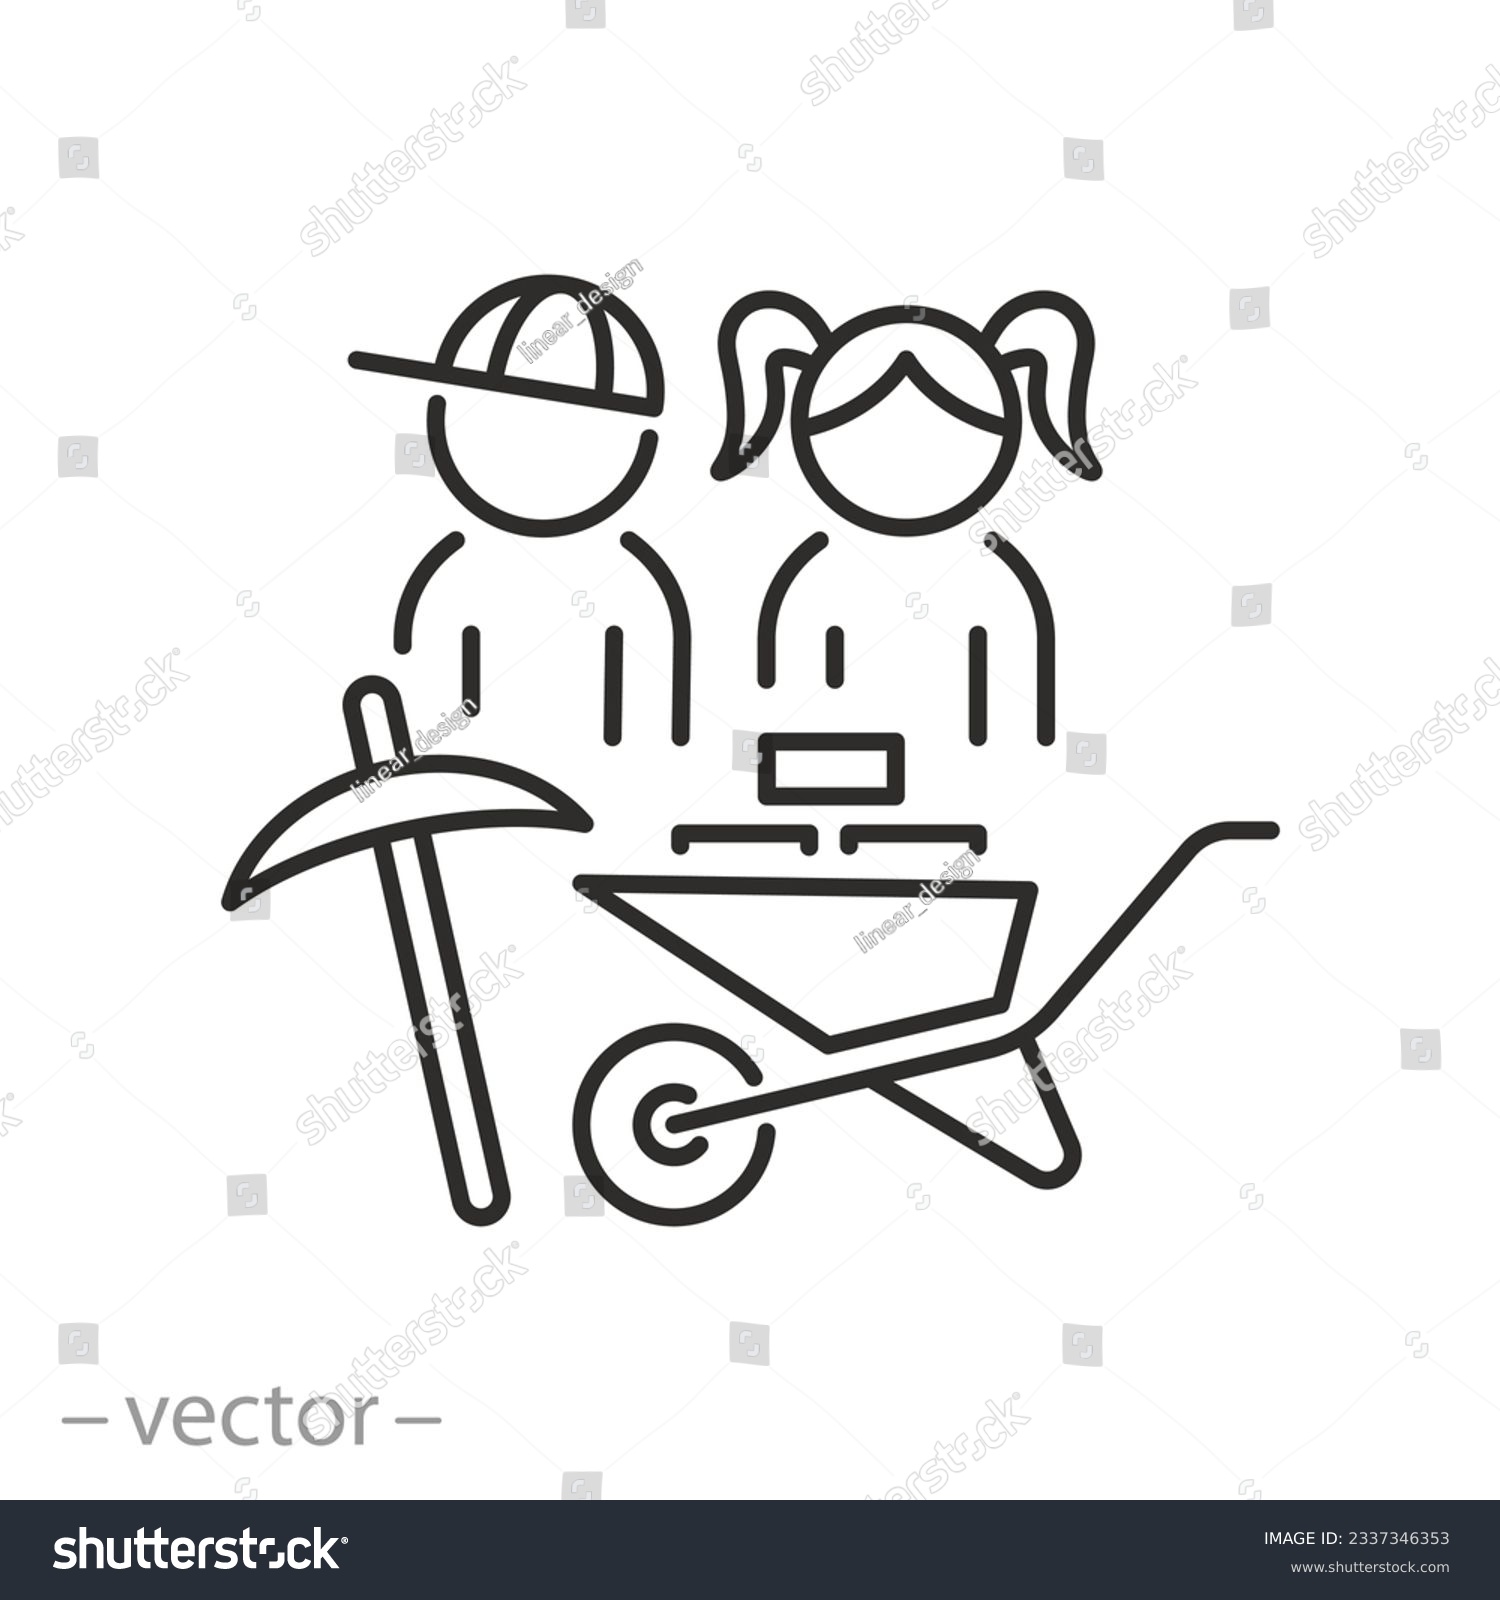 SVG of child labour icon, boy with girl and wheelbarrow cart, child abuse and exploitation, thin line symbol - editable stroke vector illustration svg